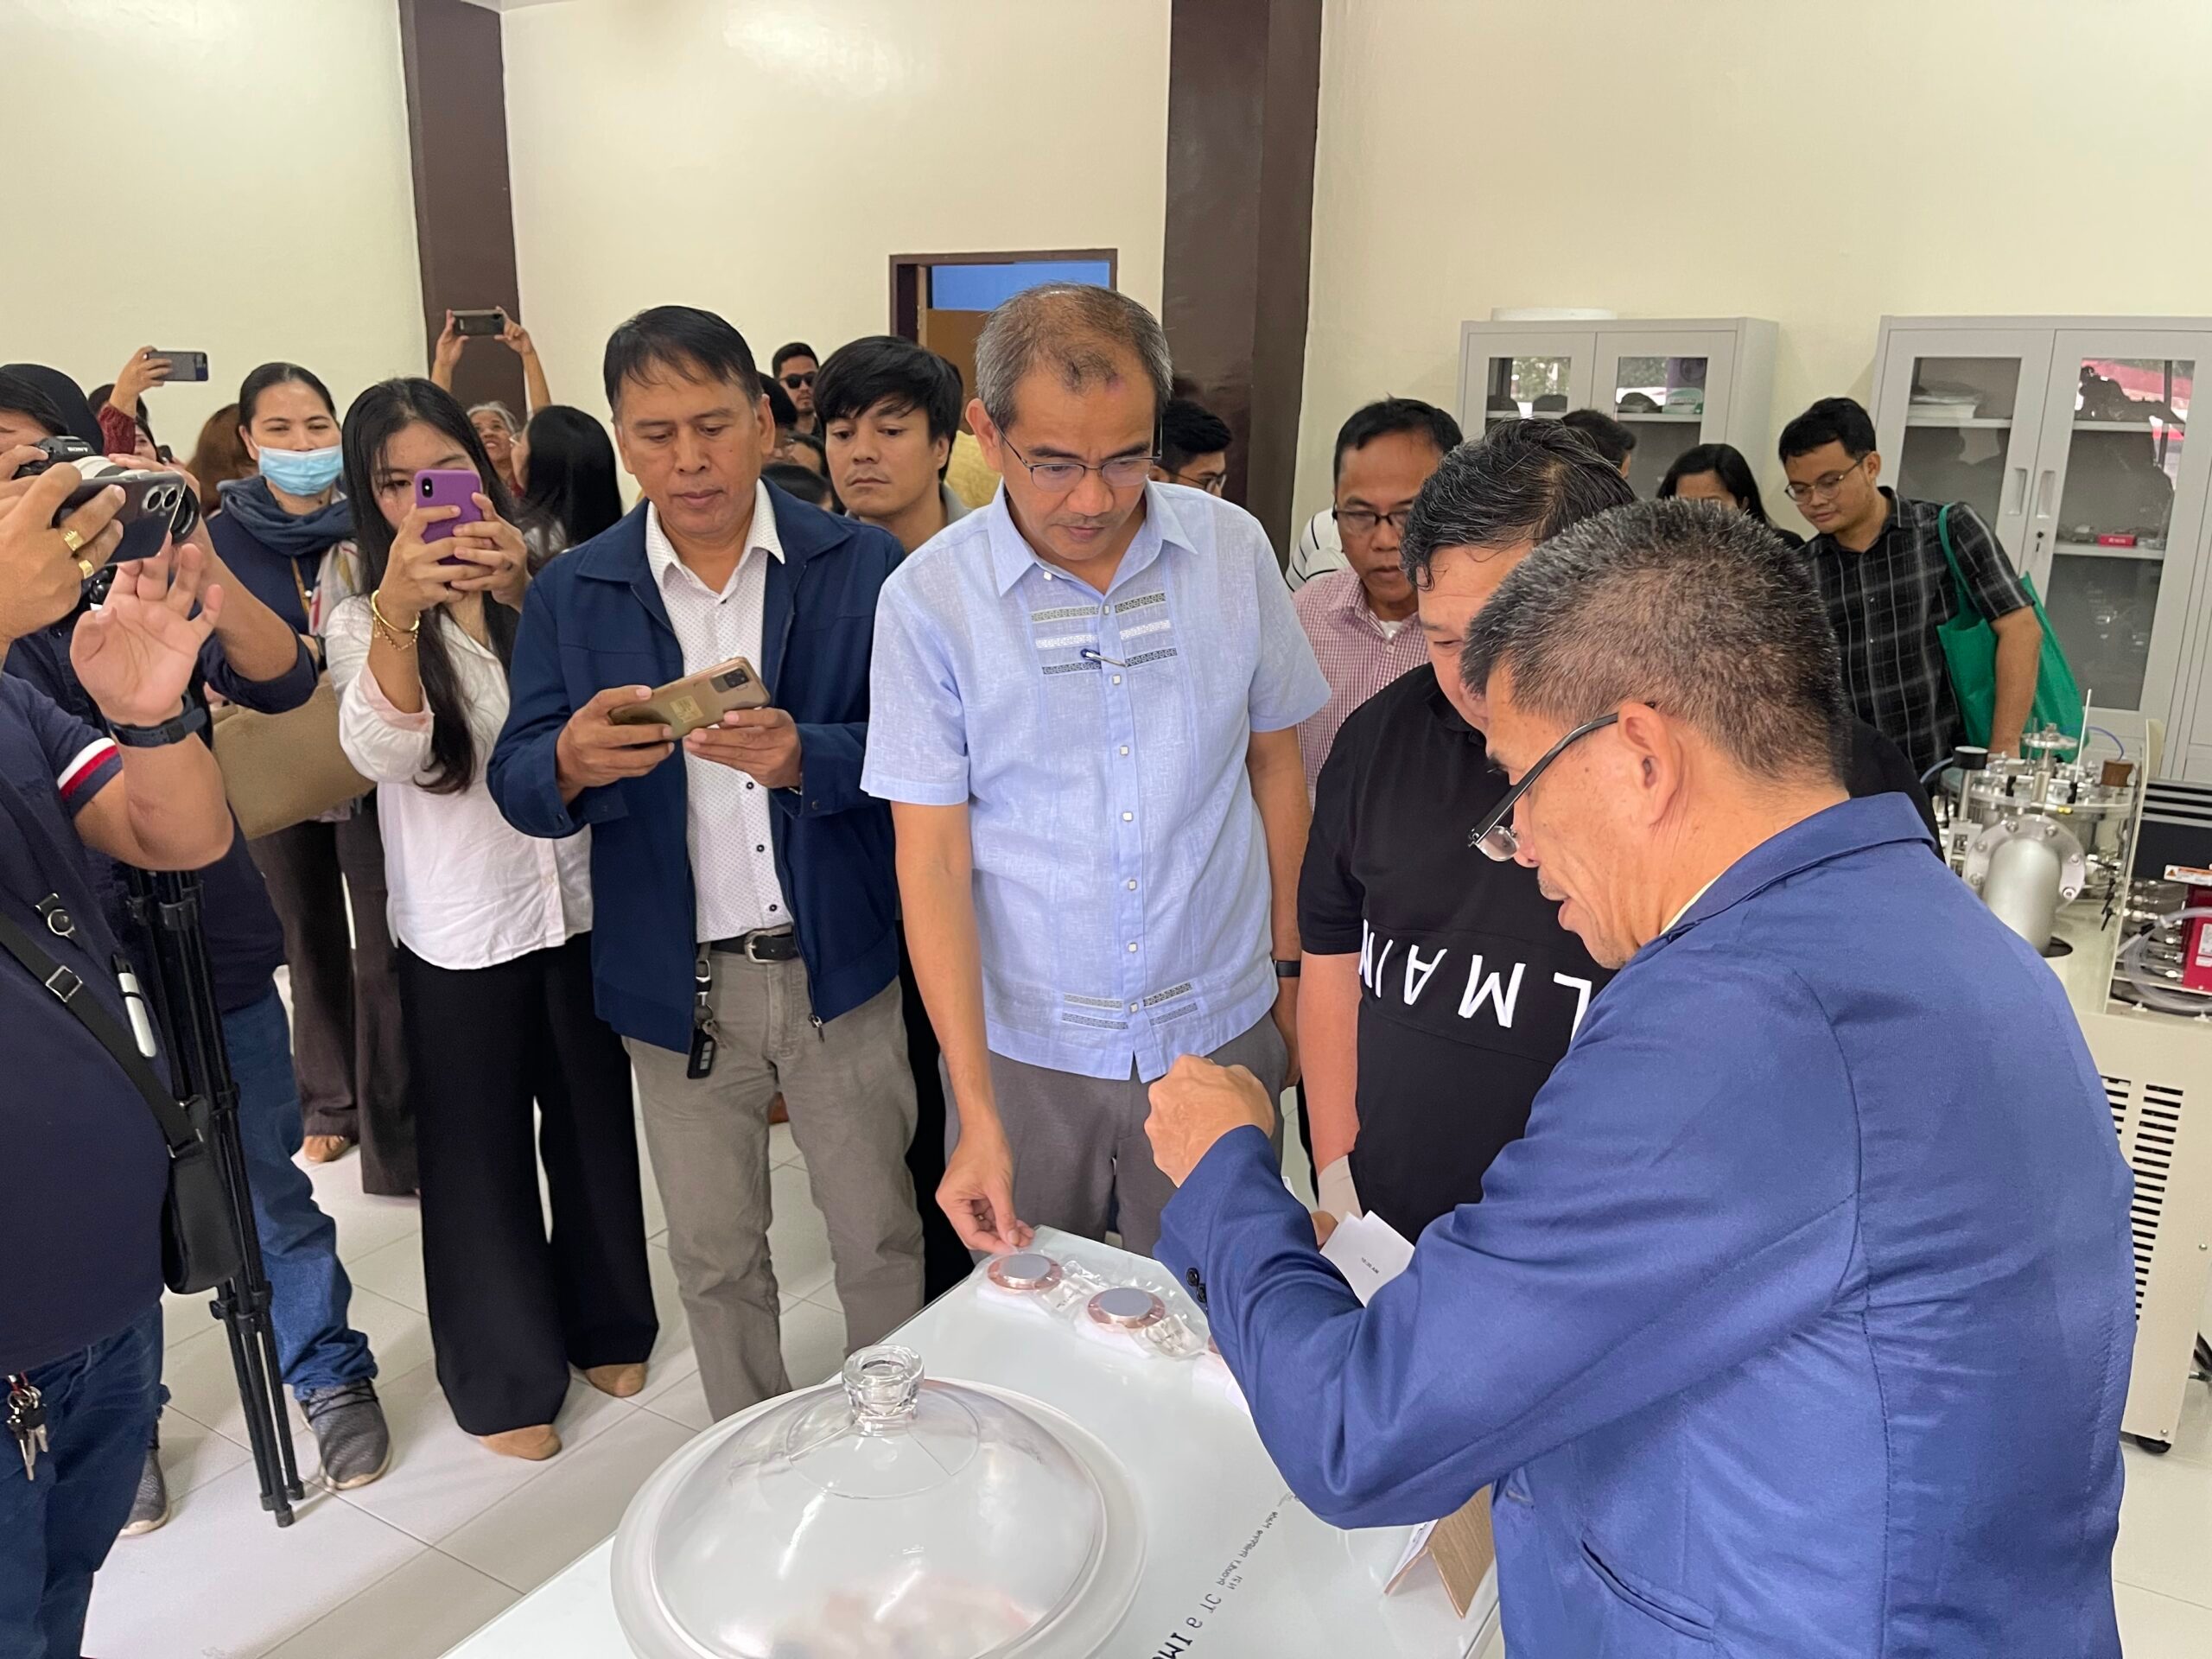 DOST unveils Mindanao’s only optoelectronics lab in Marawi